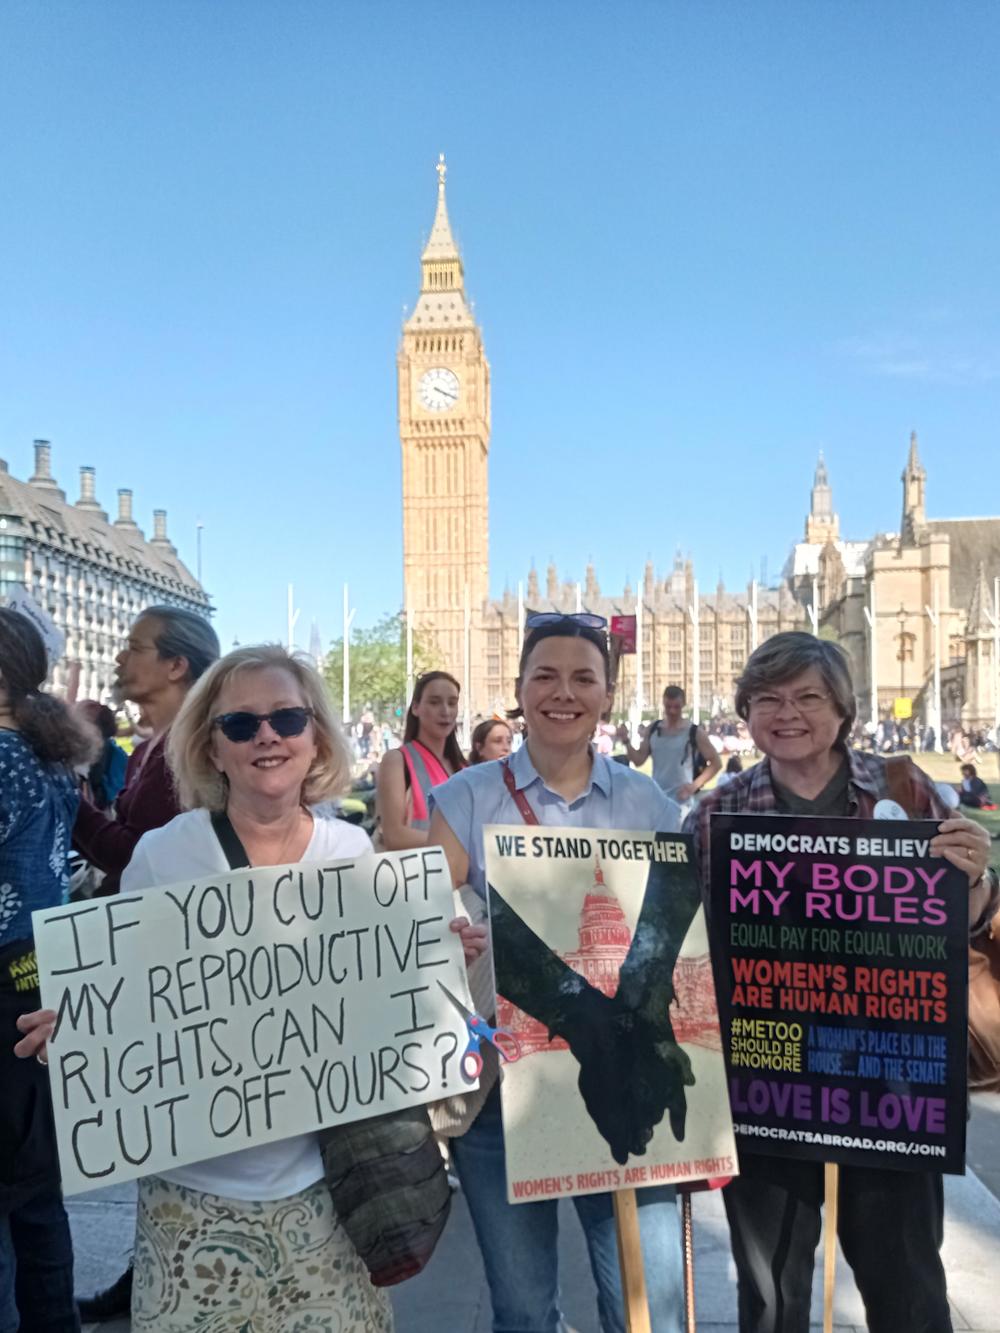 After the U.S. Supreme Court draft opinion on overturning <em>Roe v. Wade</em> was leaked, Carol Moore, right, marched in London from Parliament Square to the U.S. Embassy in protest.